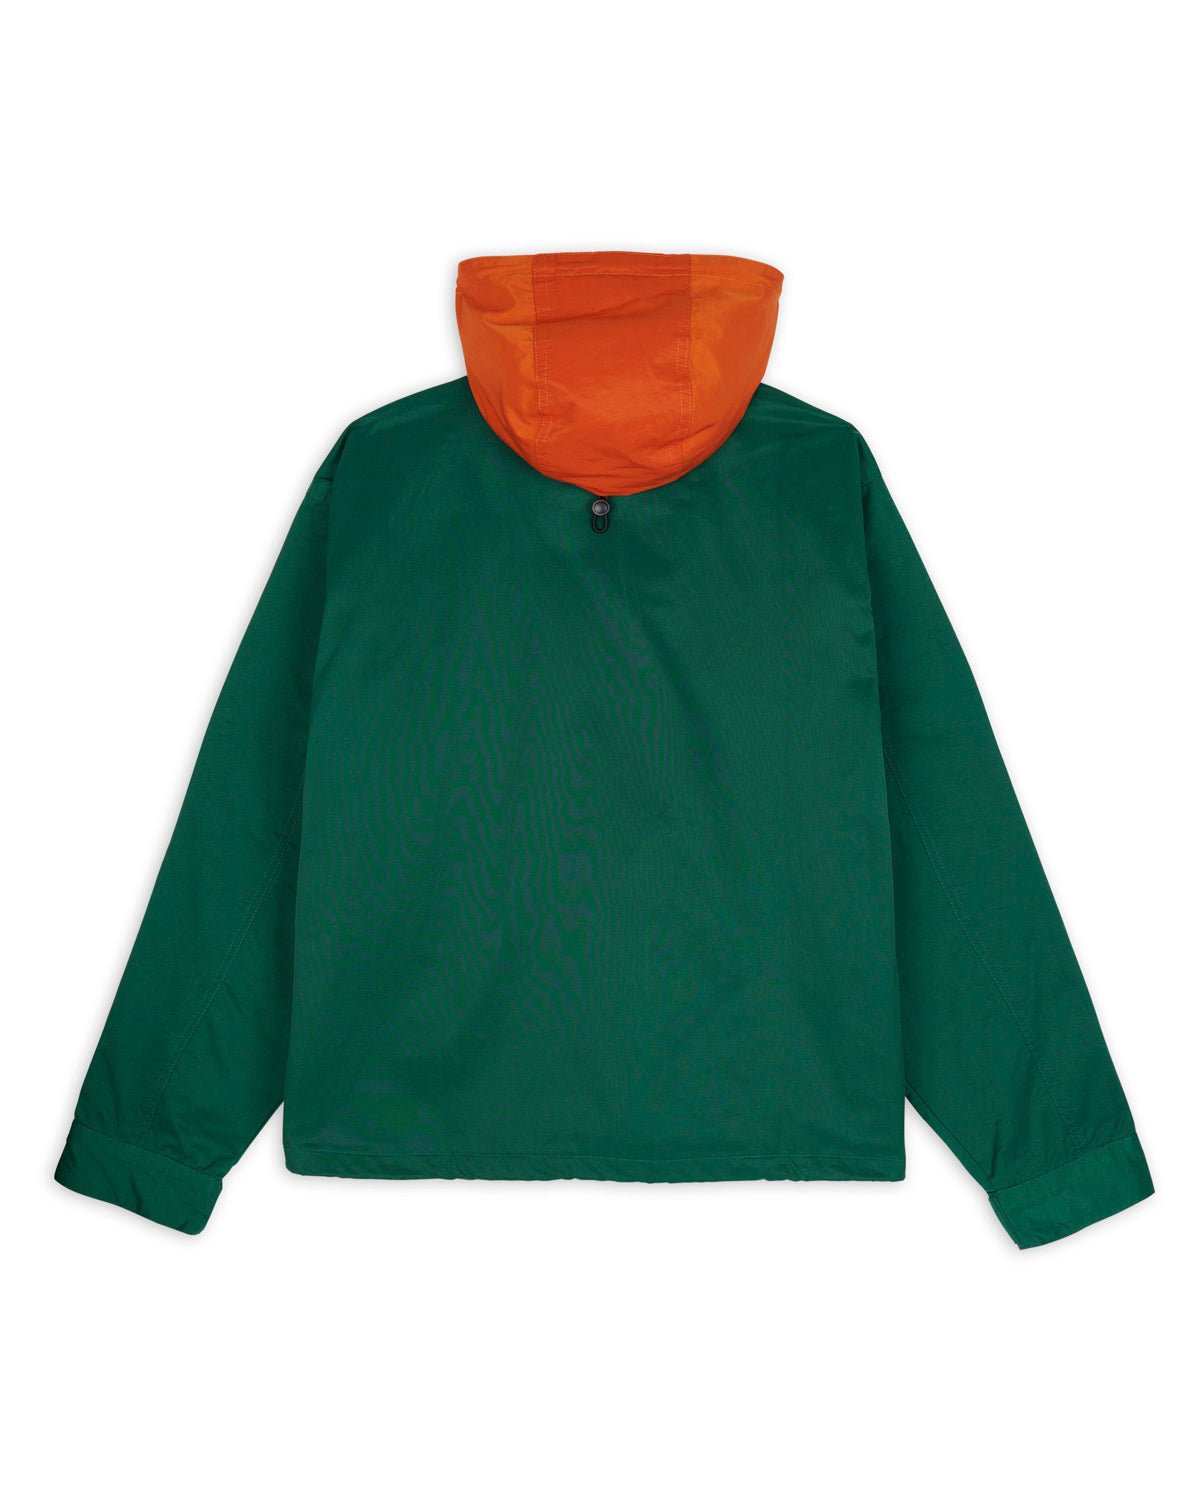 Cropped Hunting Jacket - Green/Terracotta 2